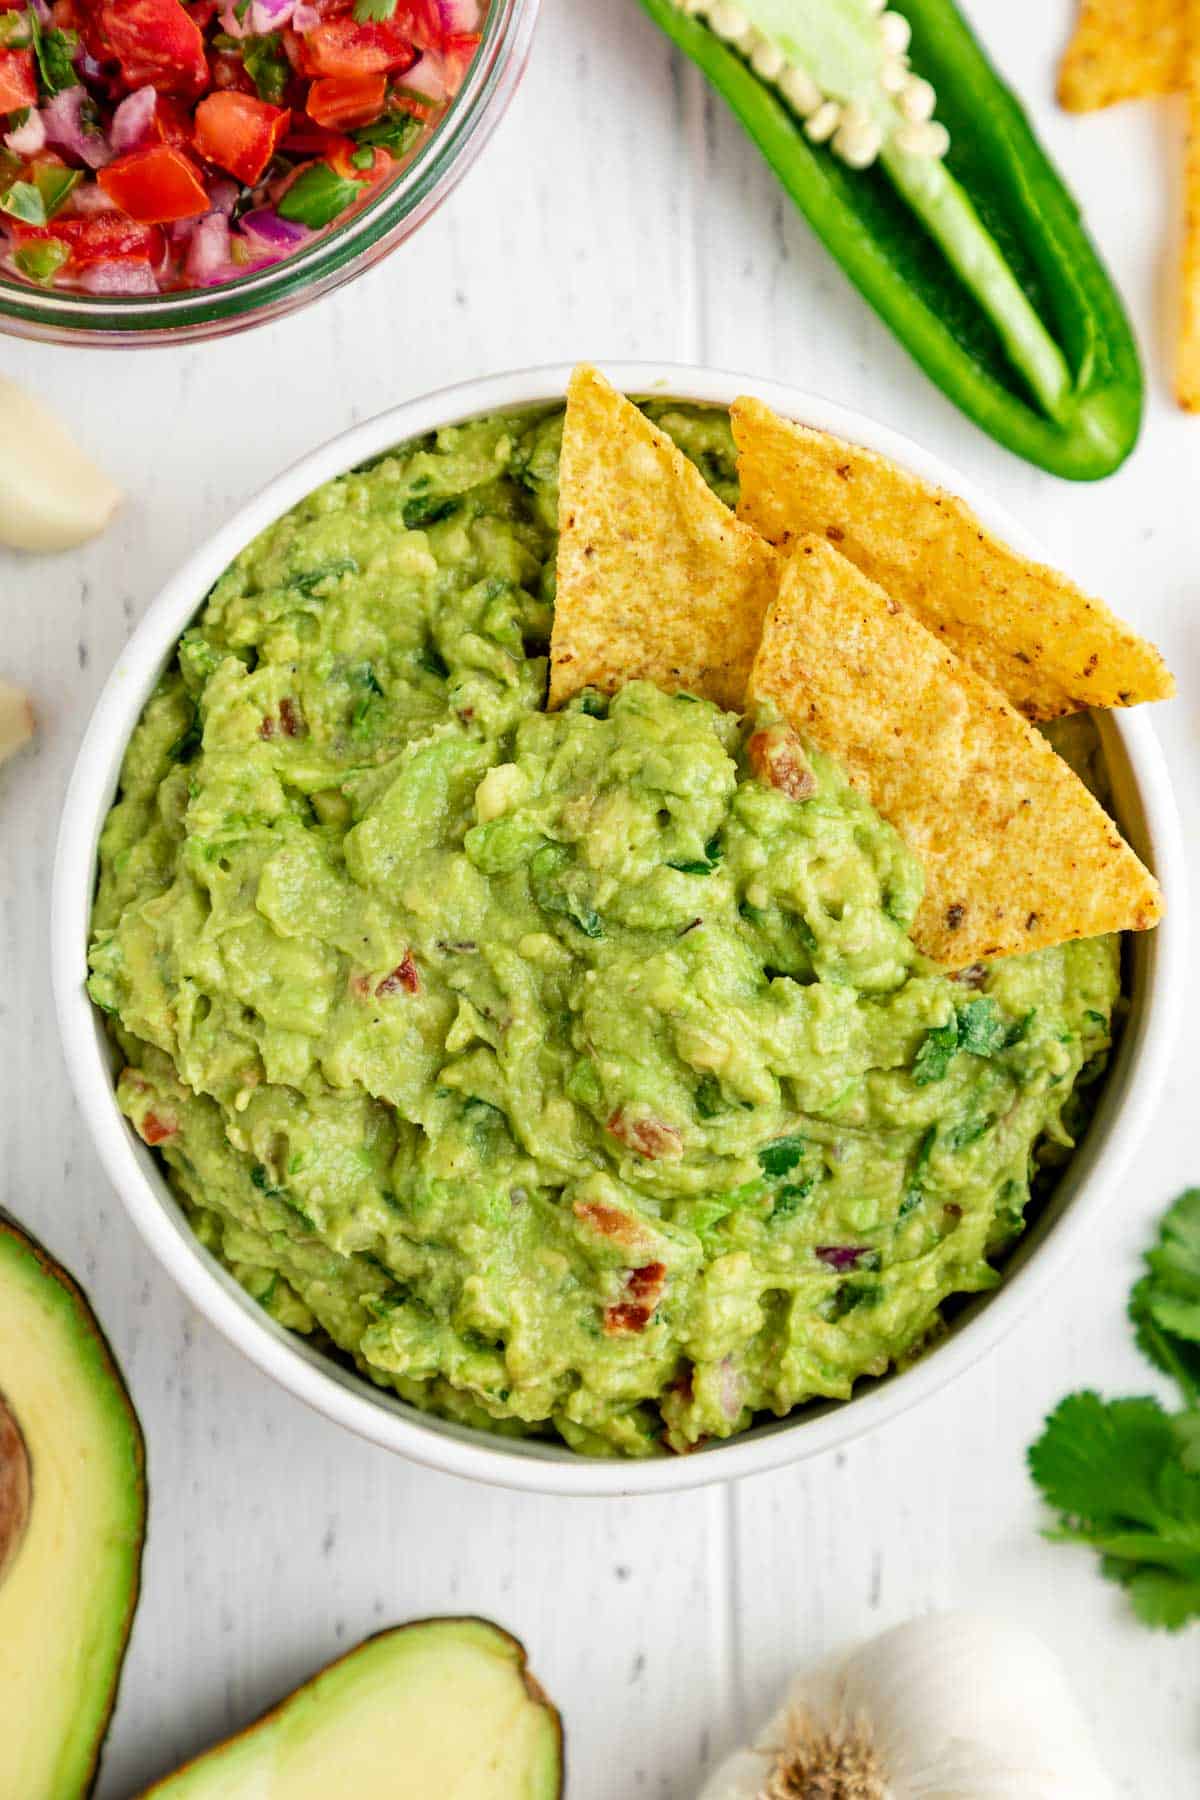 How To Make Healthy Guacamole Dip (Never Turns Brown!)